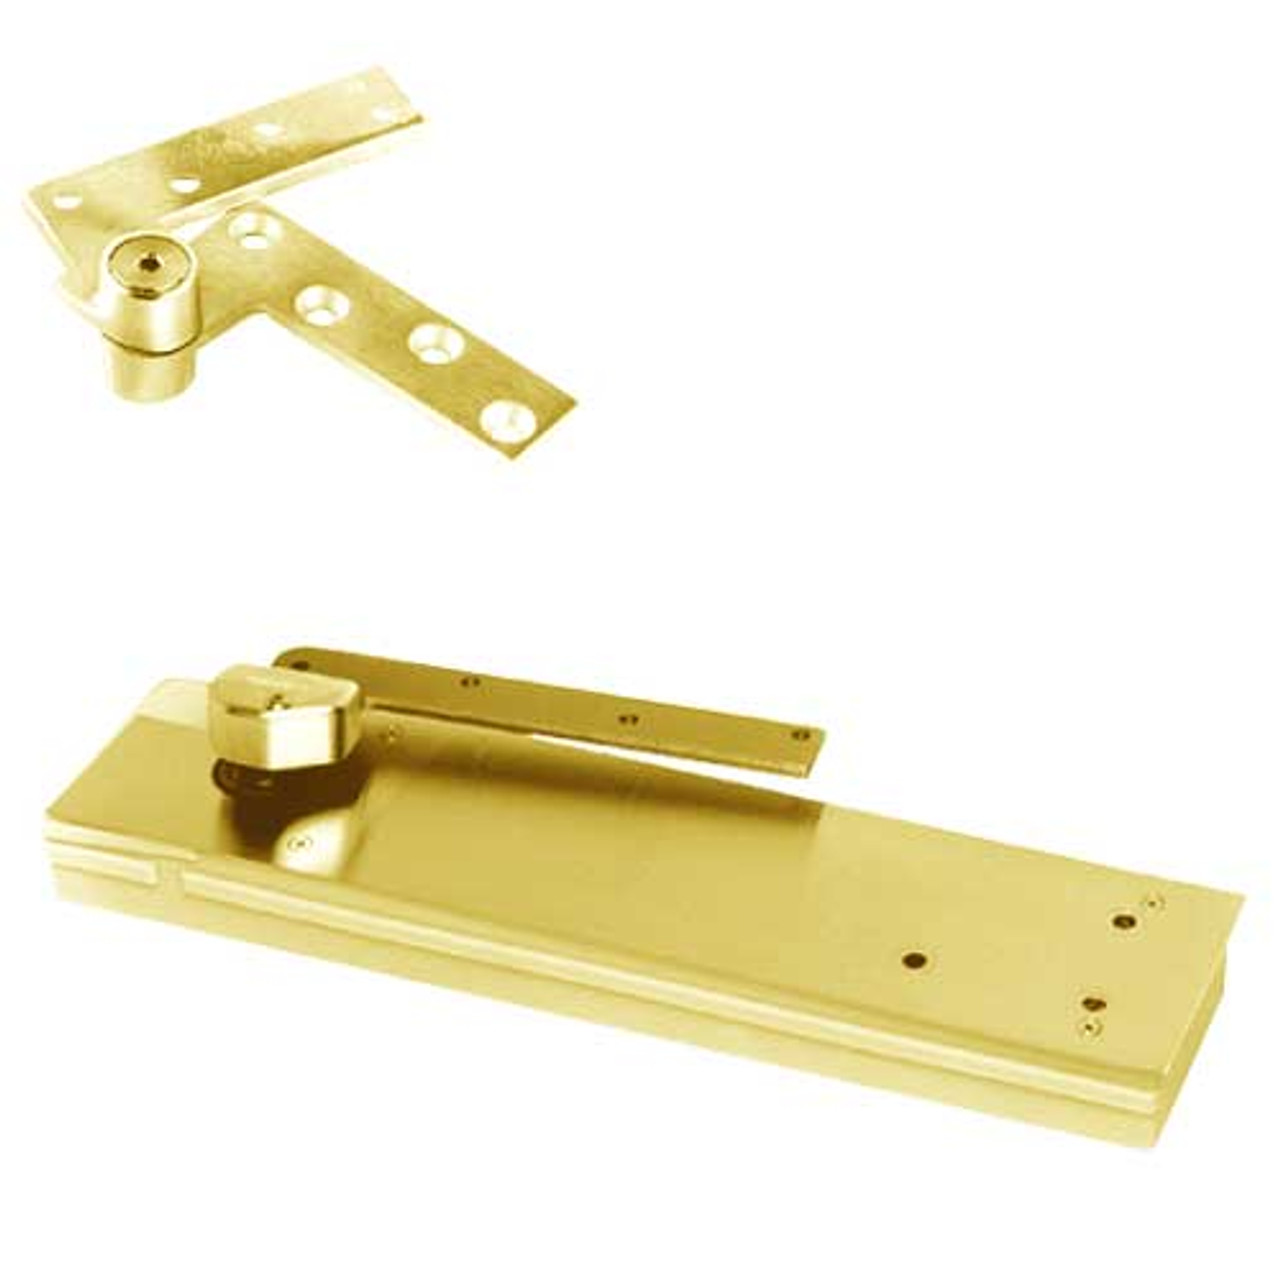 5103ABC105-1-1/2OS-RH-605 Rixson 51 Series 1-1/2" Offset Hung Shallow Depth Floor Closers in Bright Brass Finish